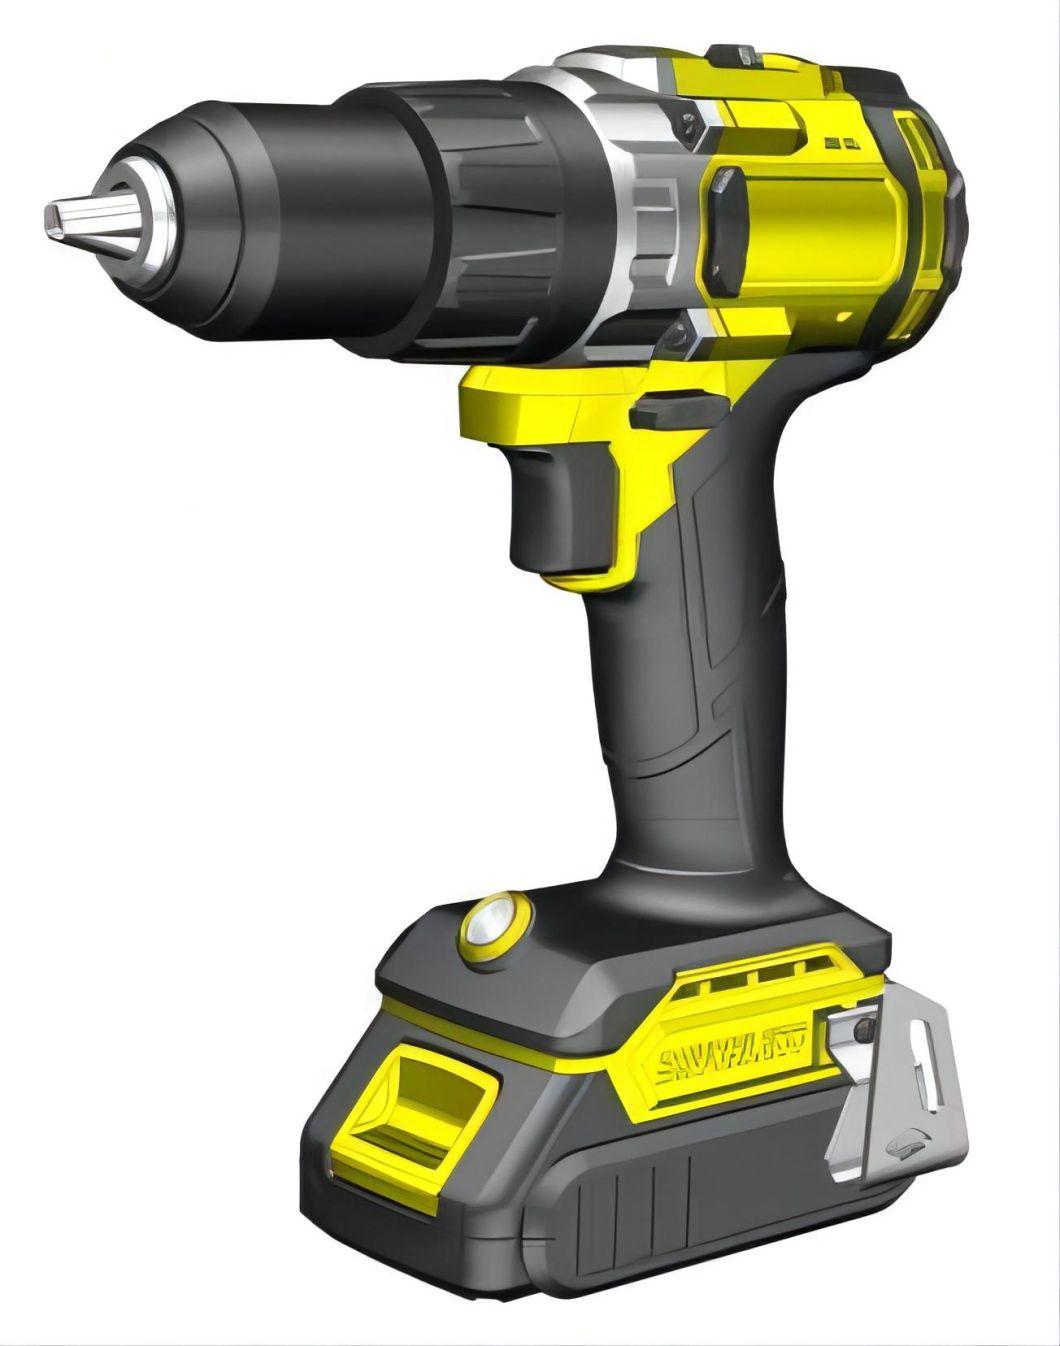 Latest/New Design-Brushless Motor-DC20V Max-Professional-Lithium-Ion Battery-Cordless/Electric-Hand Power-Tool Machines-Impact Drill